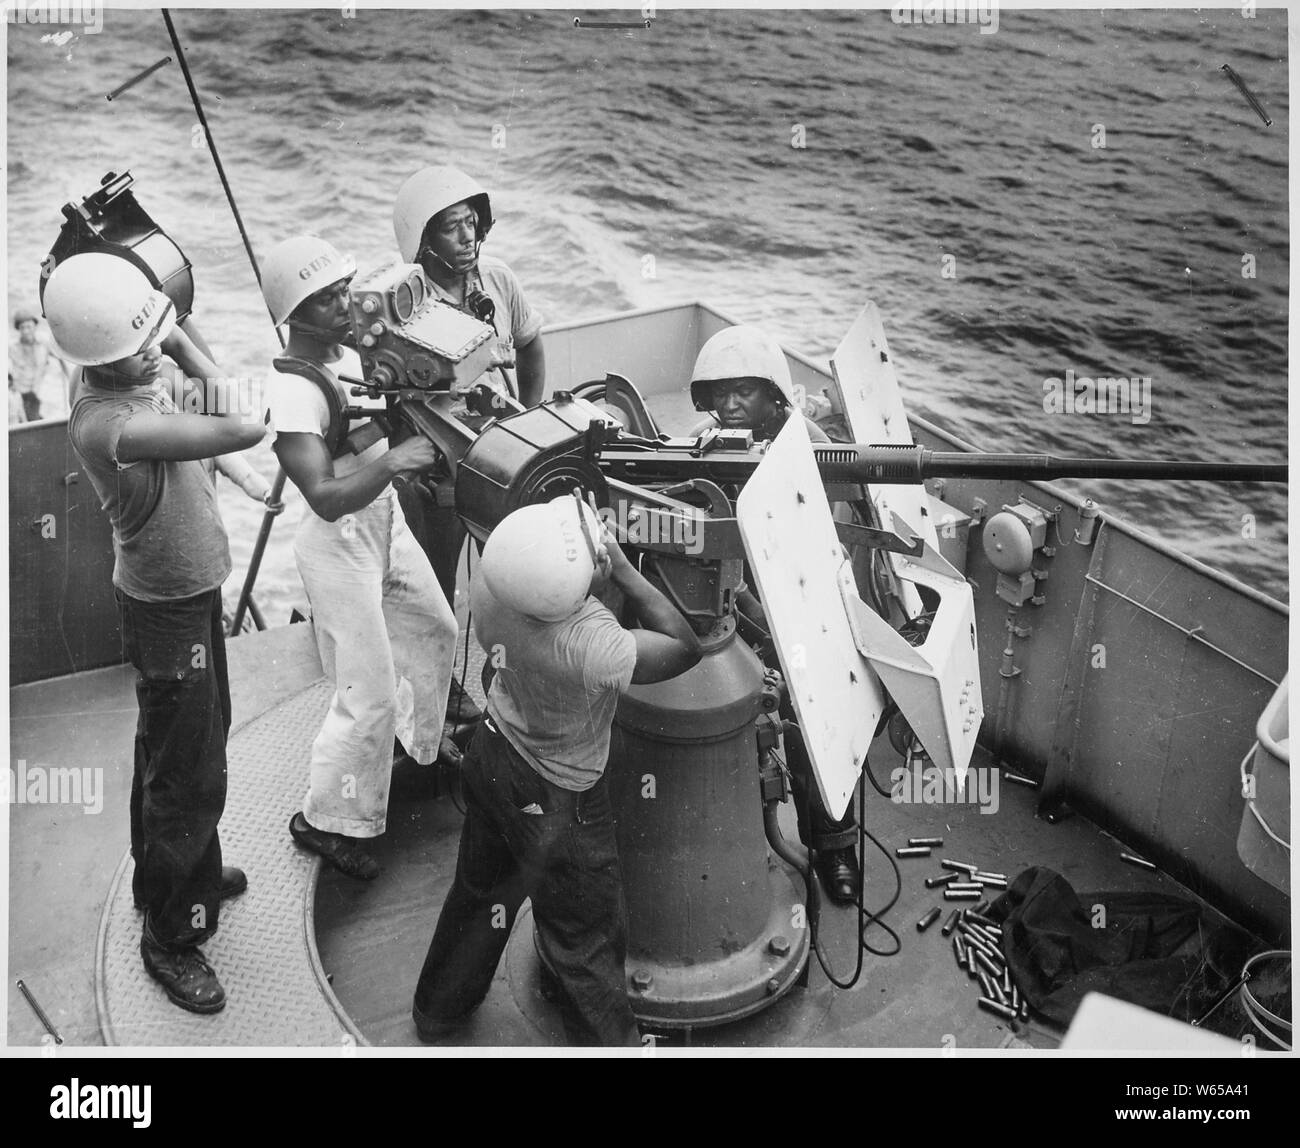 Five steward's mates stand at their battle stations, as a gun crew aboard a Coast Guard-manned frigate in the southwest Pacific. On call to general quarters, these Coast Guardsmen man a 20mm AA gun. They are, left to right, James L. Wesley, standing with a clip of shells; L. S. Haywood, firing; William Watson, reporting to bridge by phone from his gun captain's post; William Morton, loading a full clip, assisted by Odis Lane, facing camera across gun barrel., ca. 1941 - ca. 1945 Stock Photo